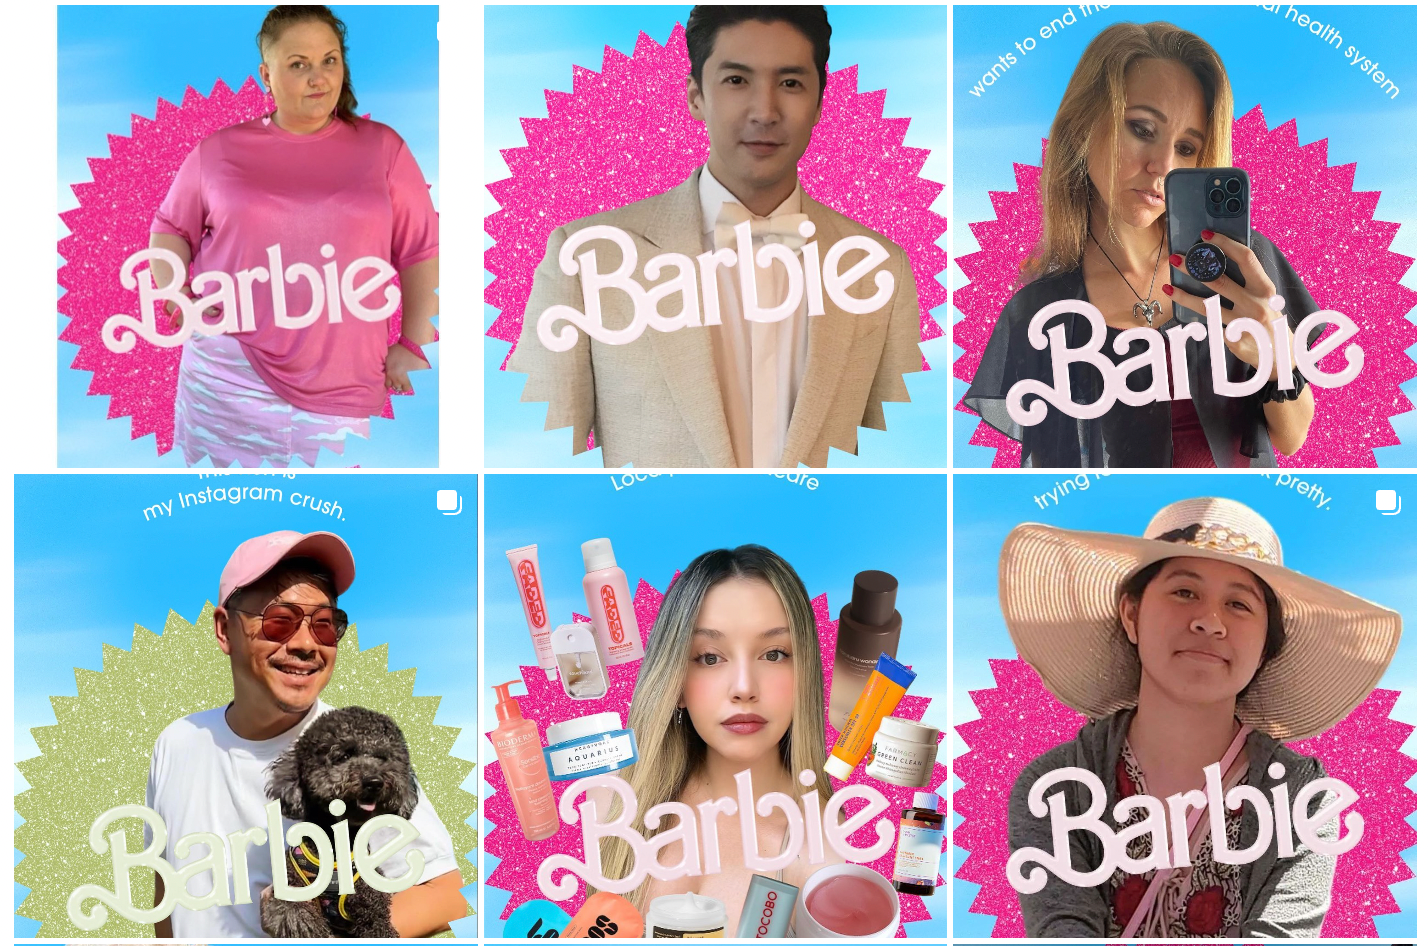 A selection of Barbie AI-powered selfie generator posts on Instagram